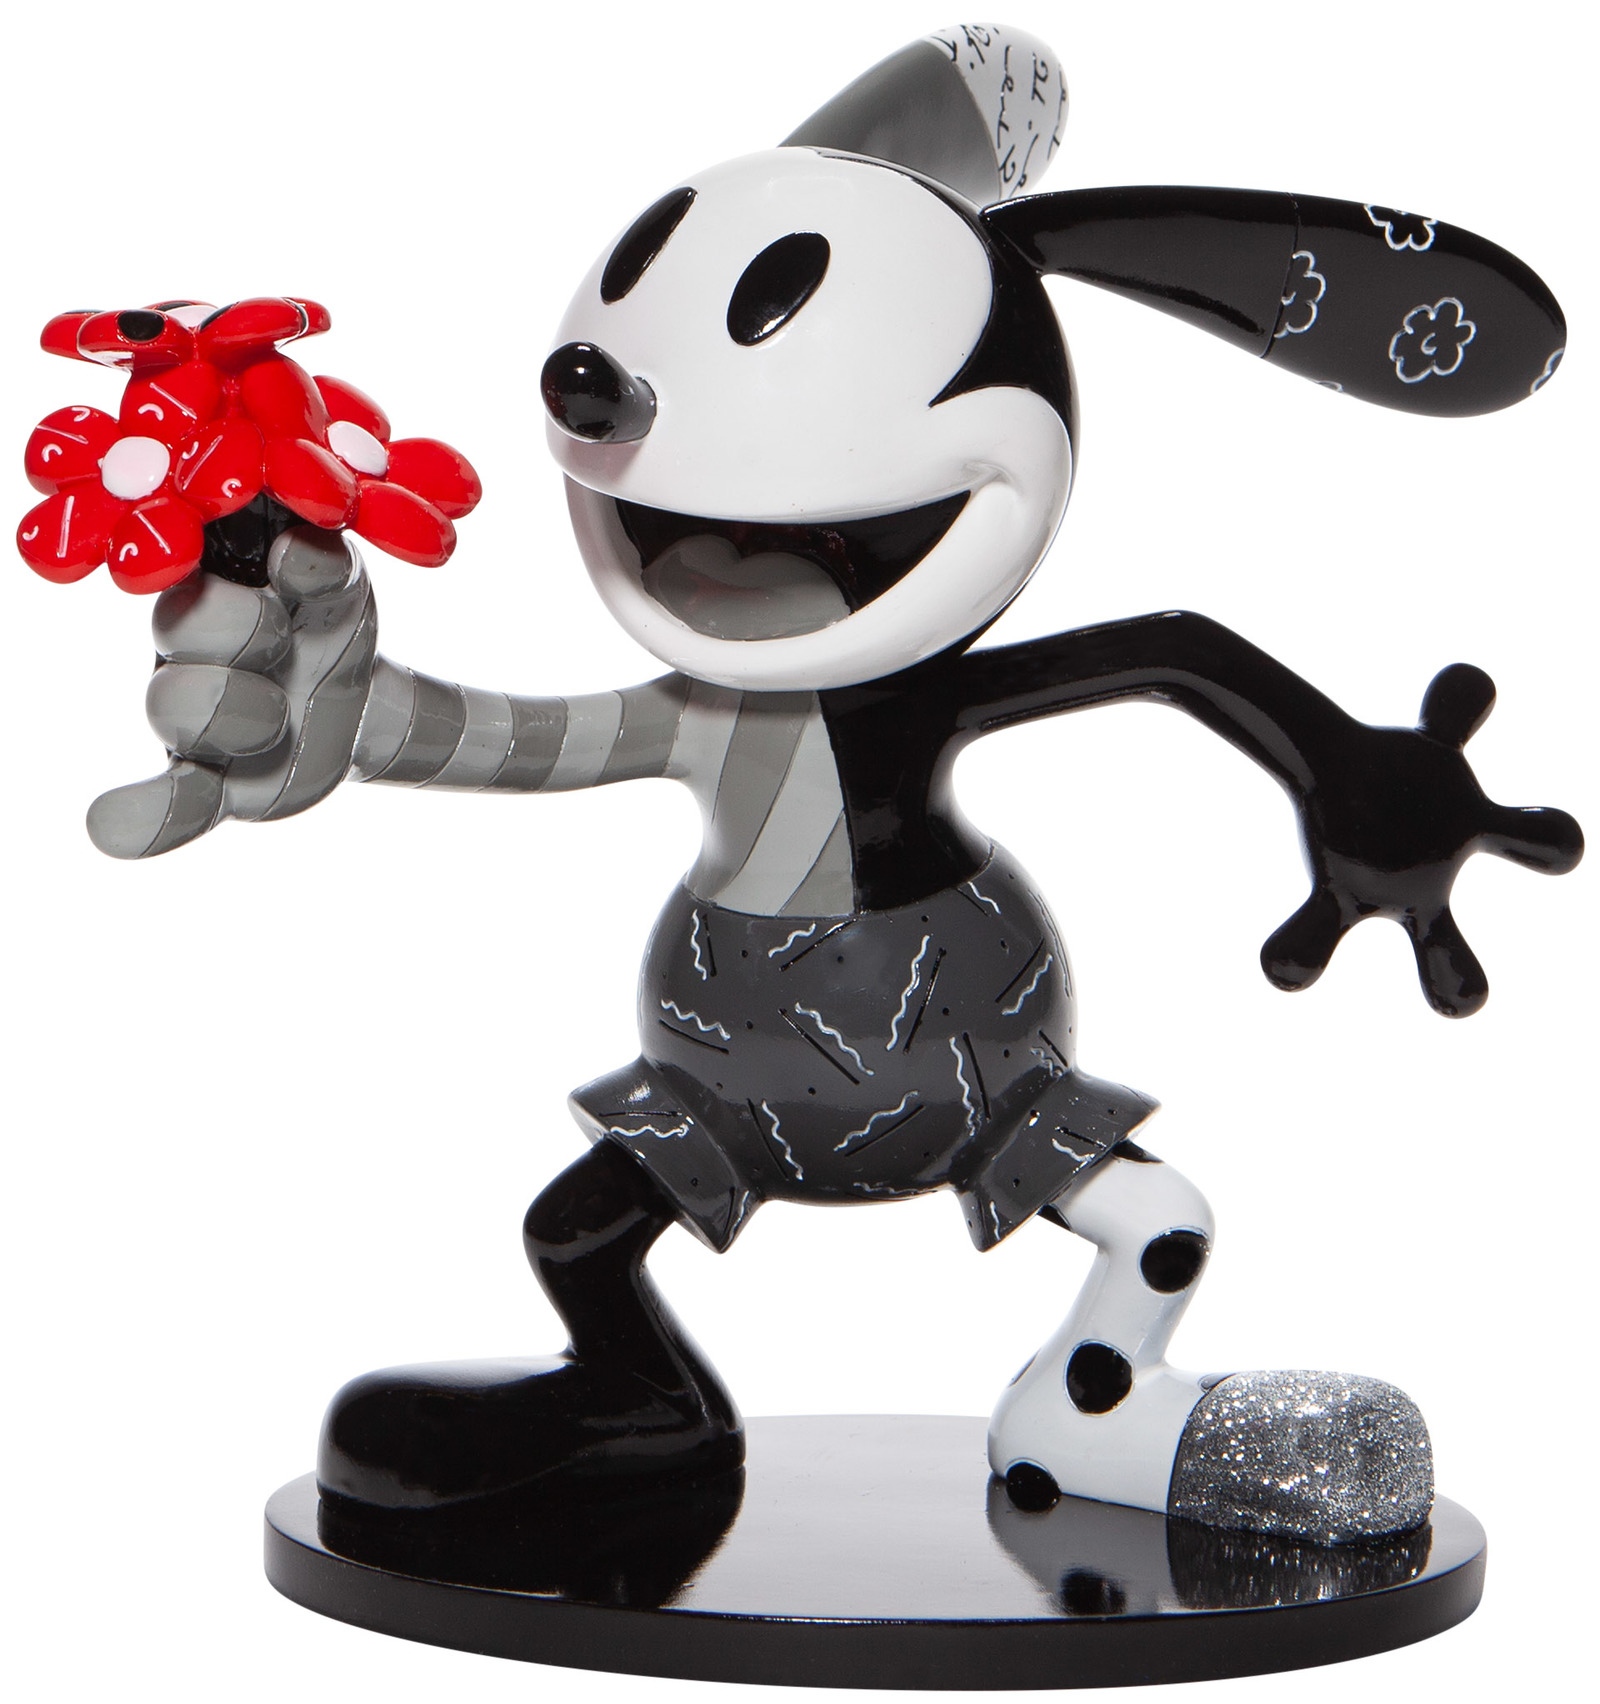 Special Sale SALE6007097 Disney by Britto 6007097 Oswald Lucky Rabbit Figurine